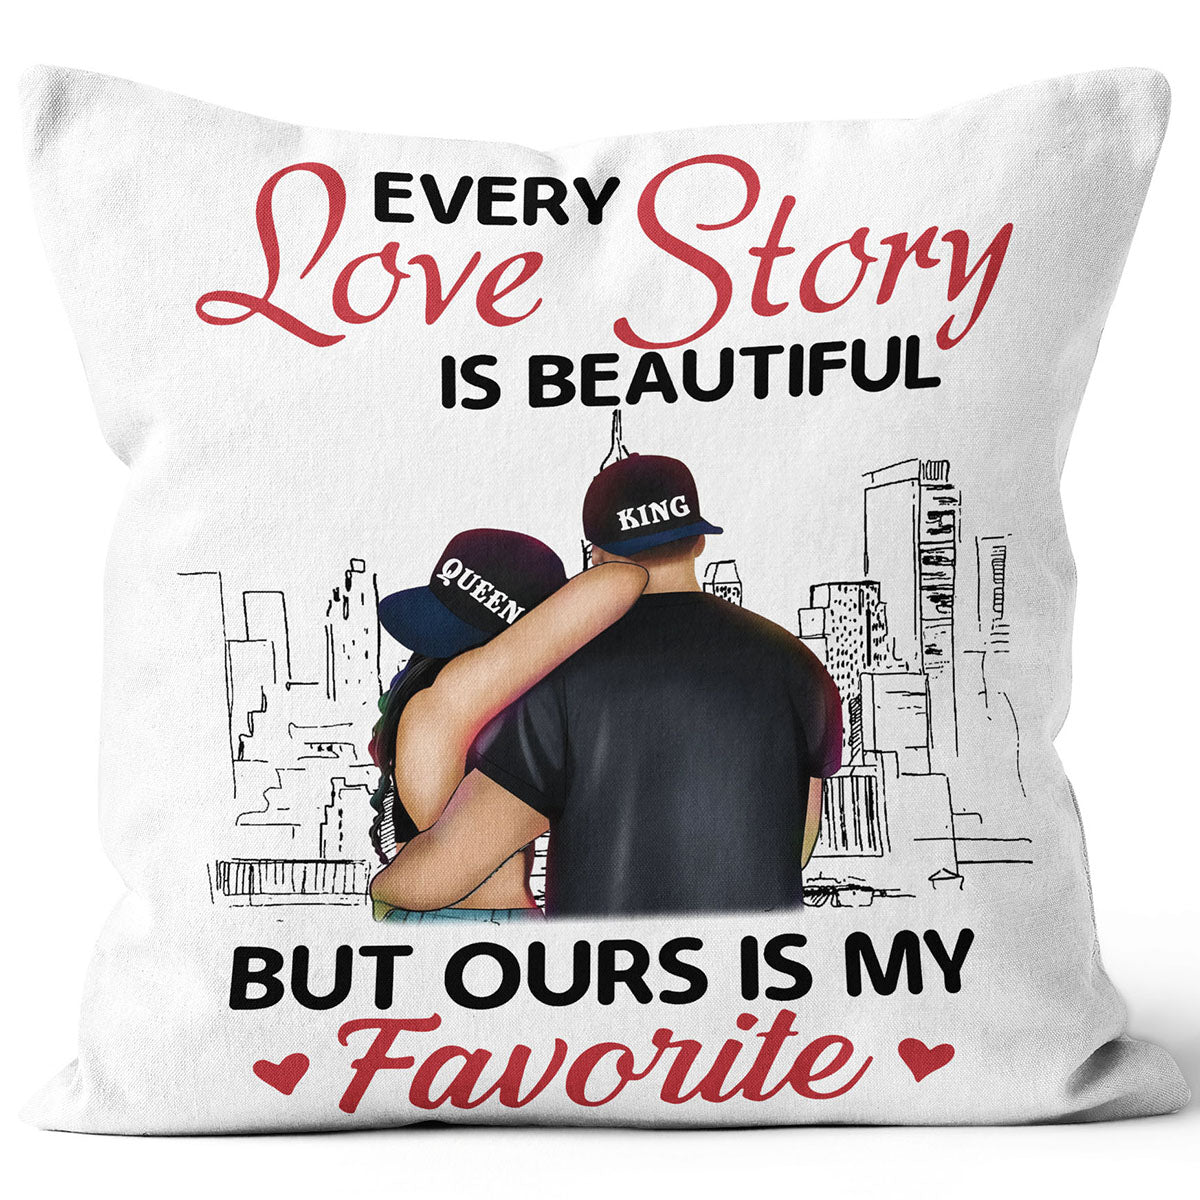 My Best Dad Personalized Pillow: Gift/Send Father's Day Gifts Online  JVS1177572 |IGP.com